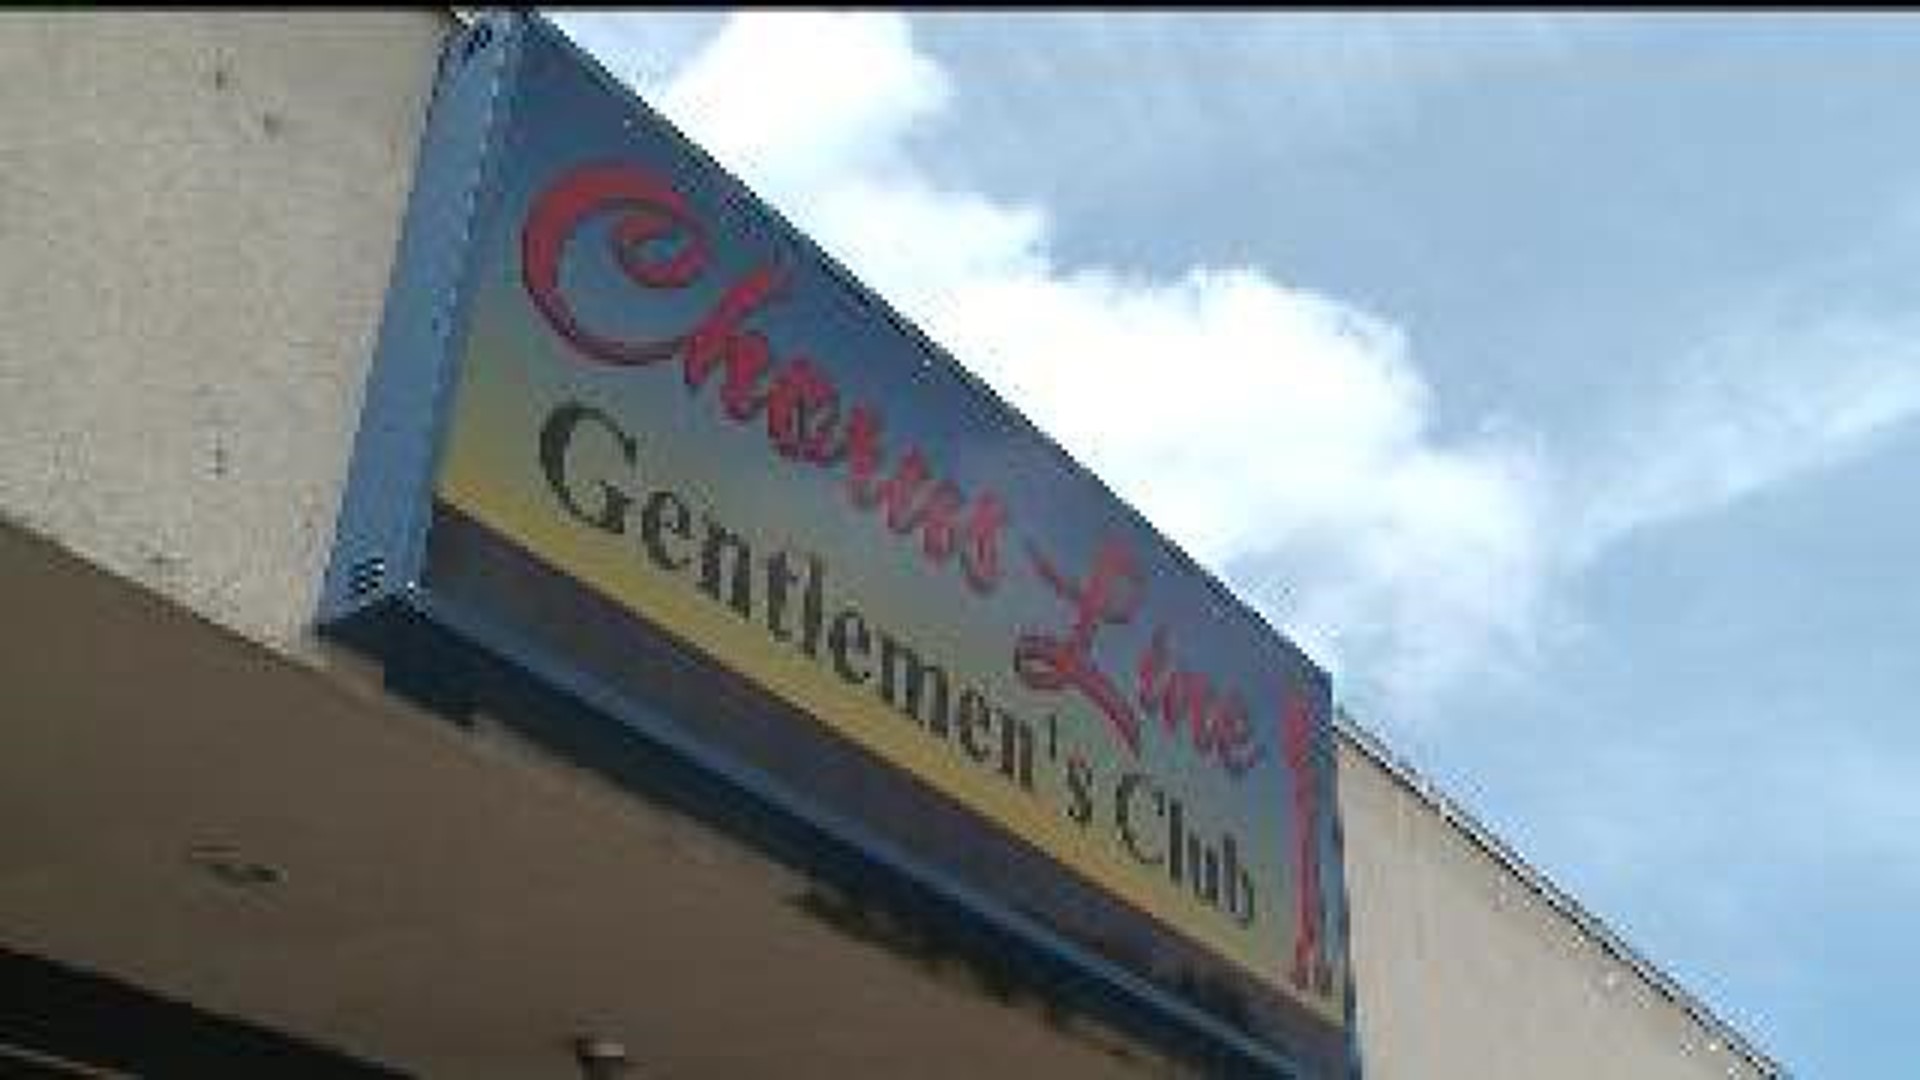 City settles suit with Strip Club